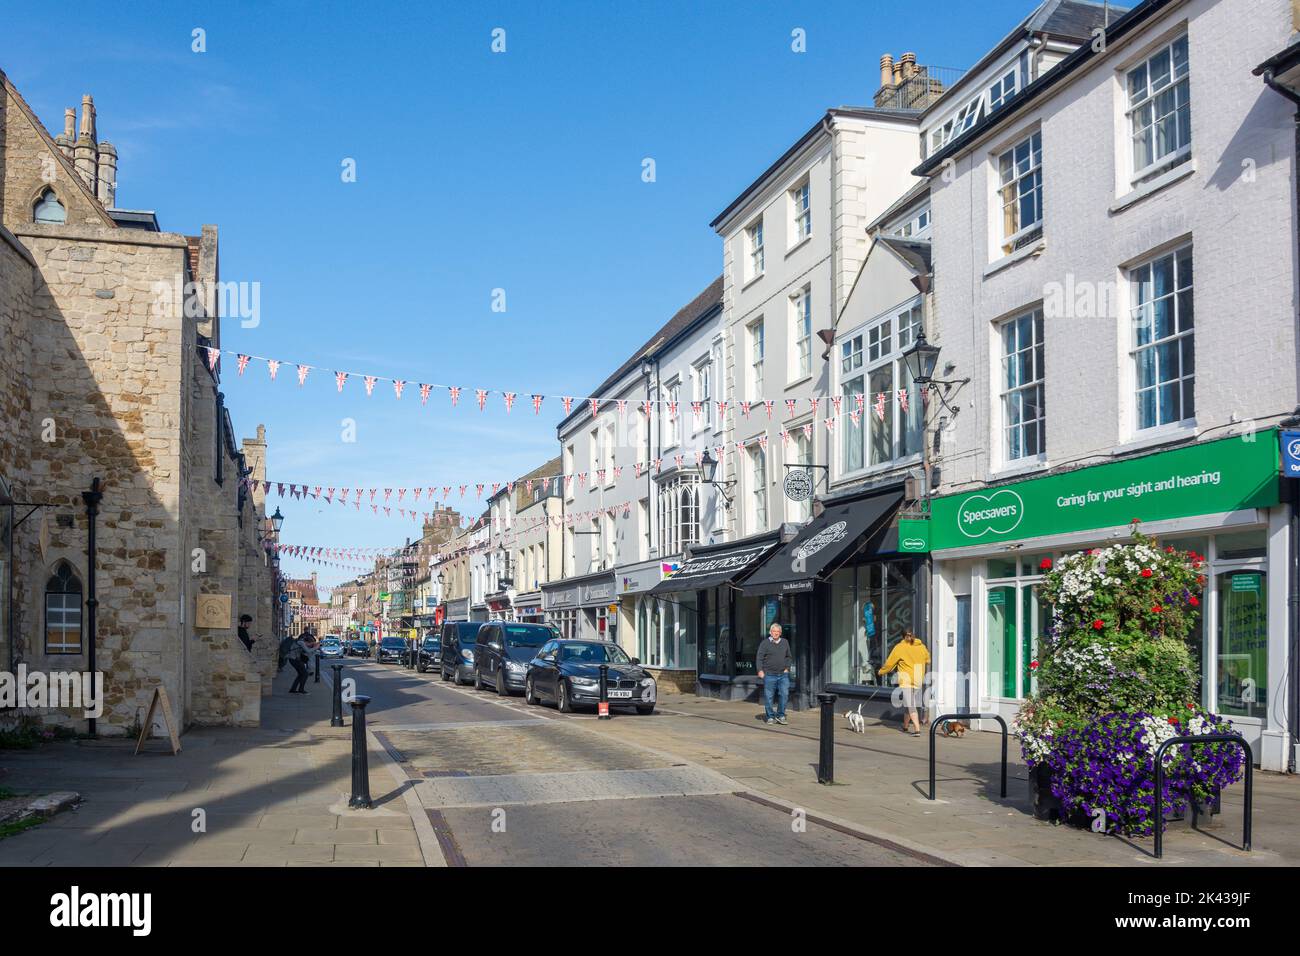 High Street, Ely, Cambridgeshire, Angleterre, Royaume-Uni Banque D'Images